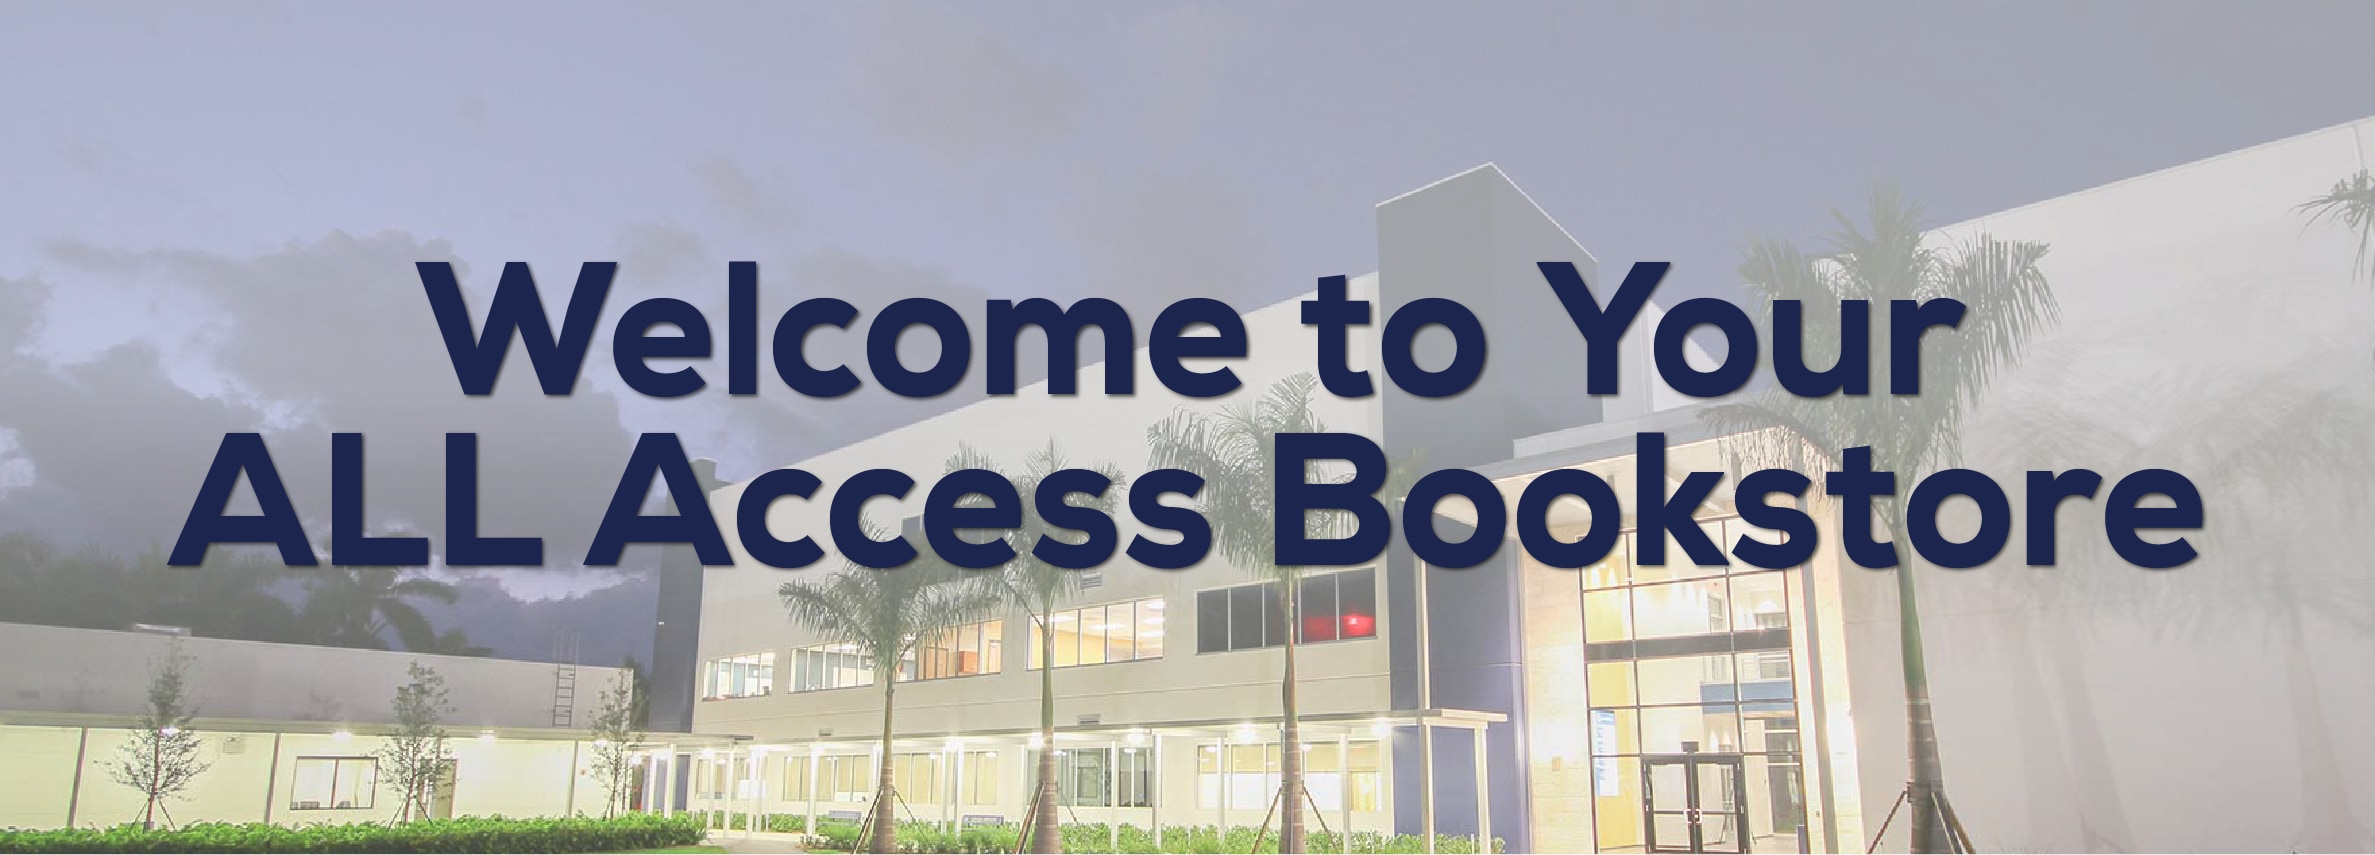 Welcome to Your All Access Bookstore